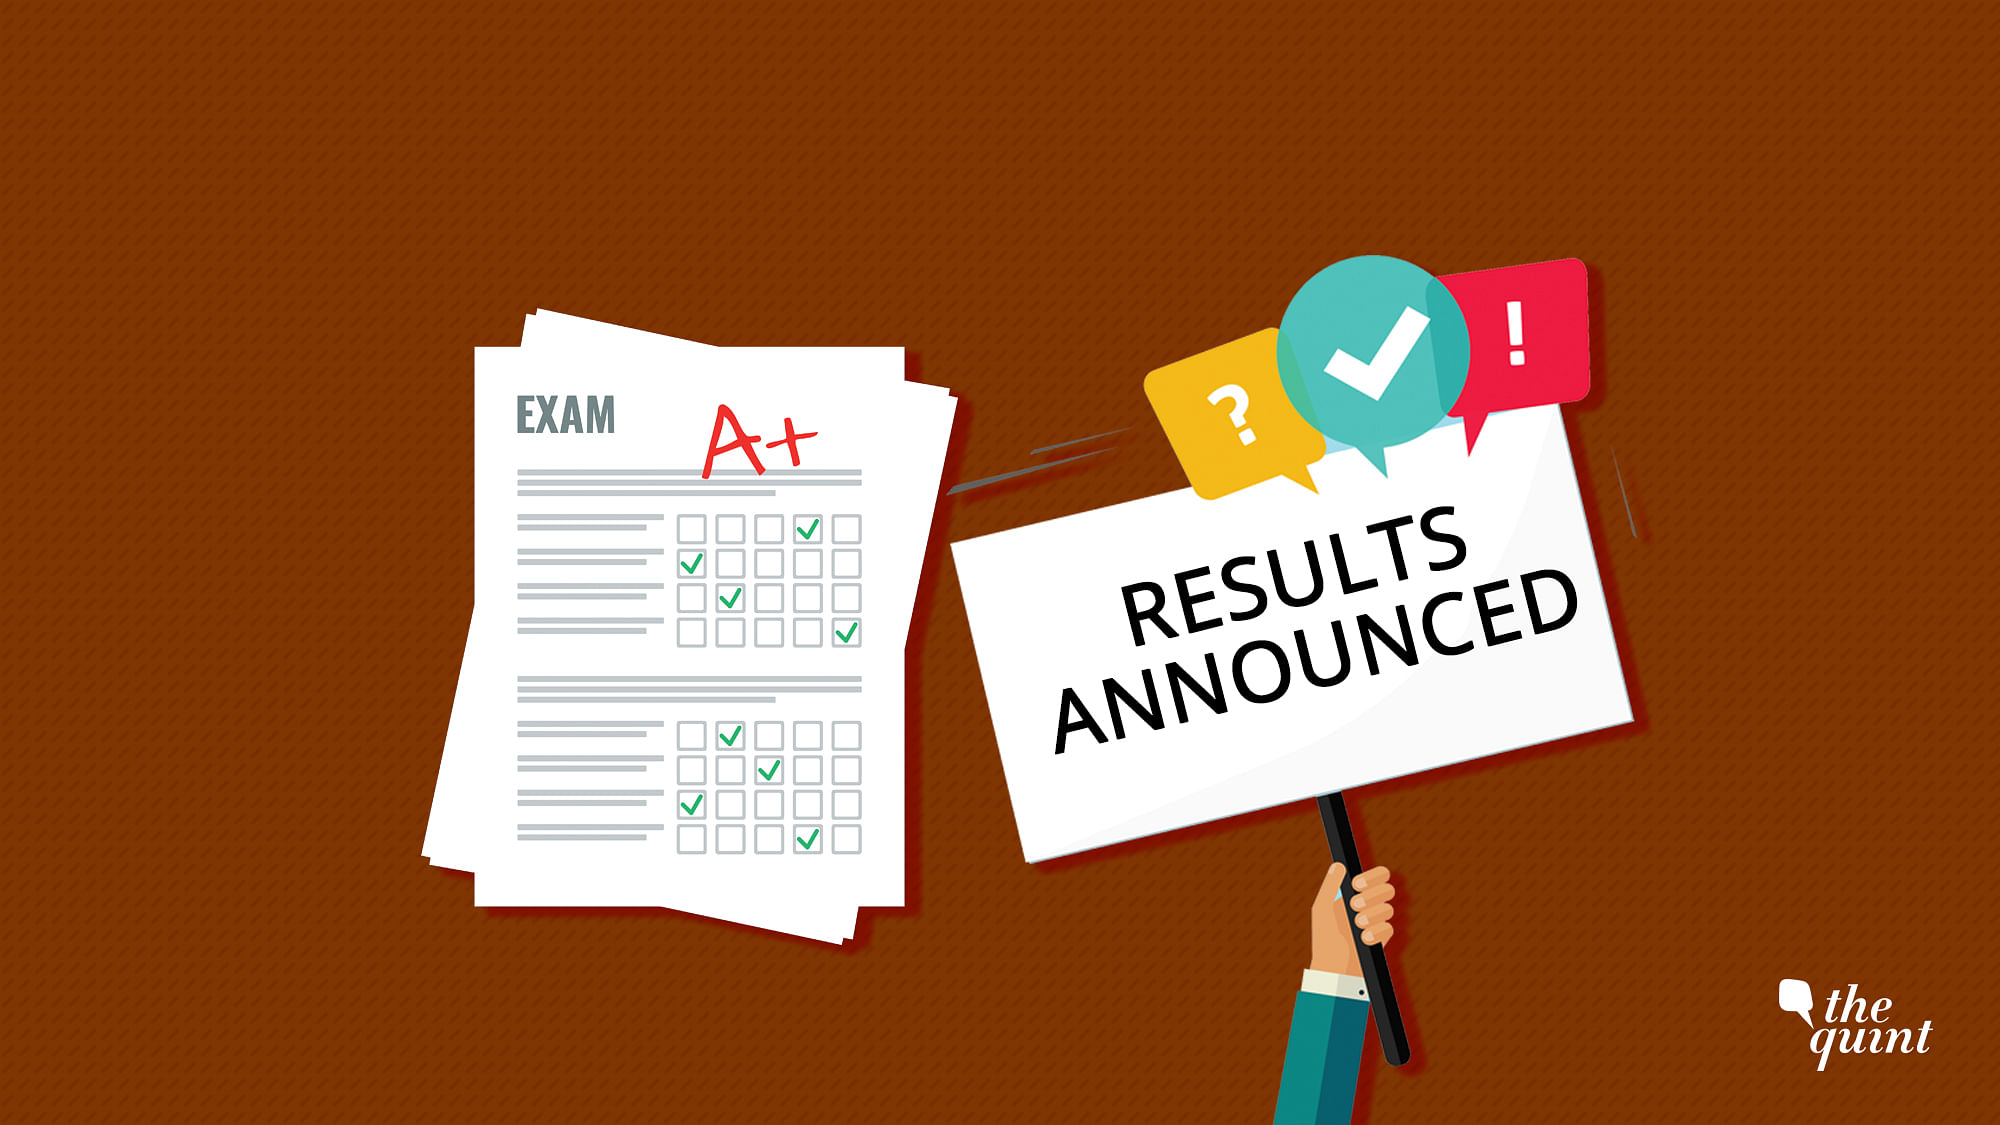 JEE Main 2021 March Session Results announced.&nbsp;